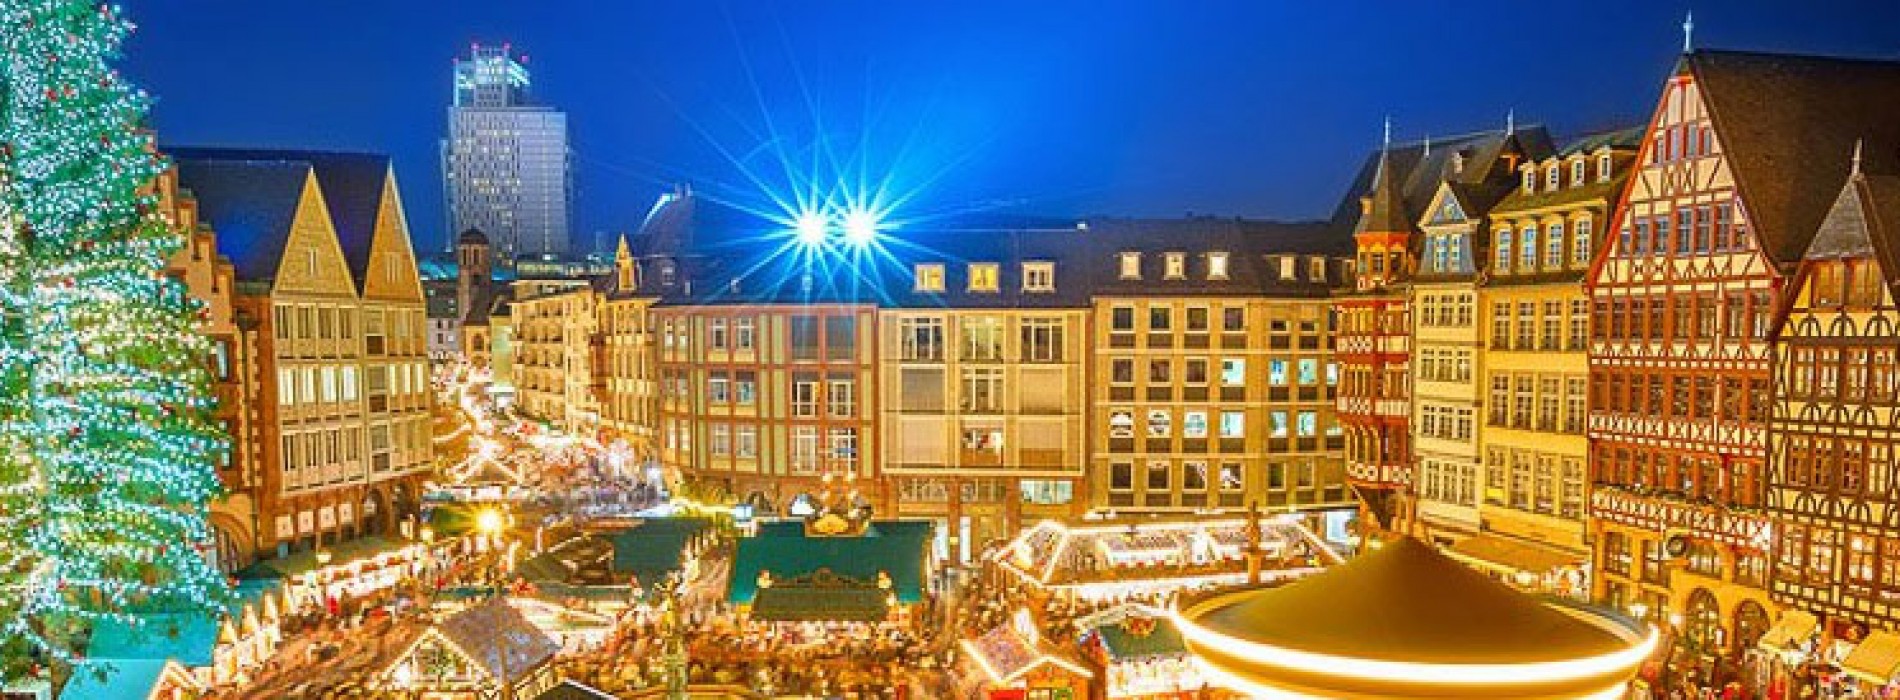 Christmas Markets in Germany: A Delight for All the Senses